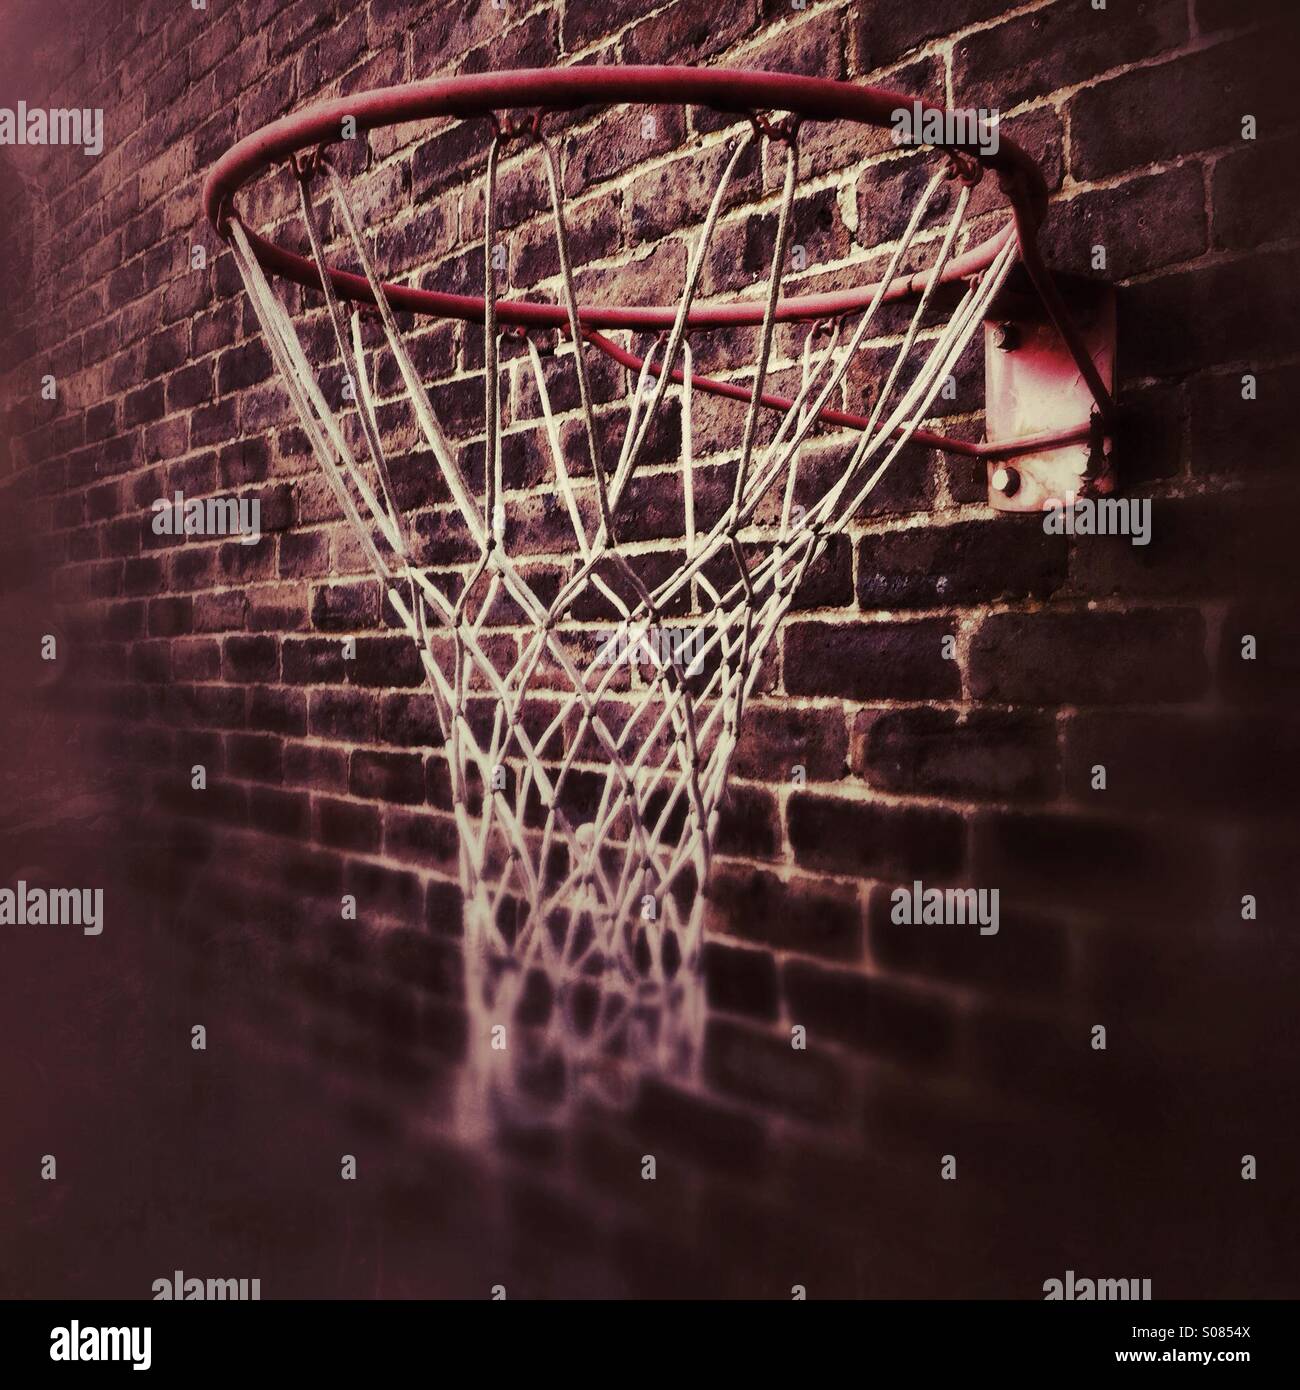 Netball net or hoop mounted on a brick wall Stock Photo